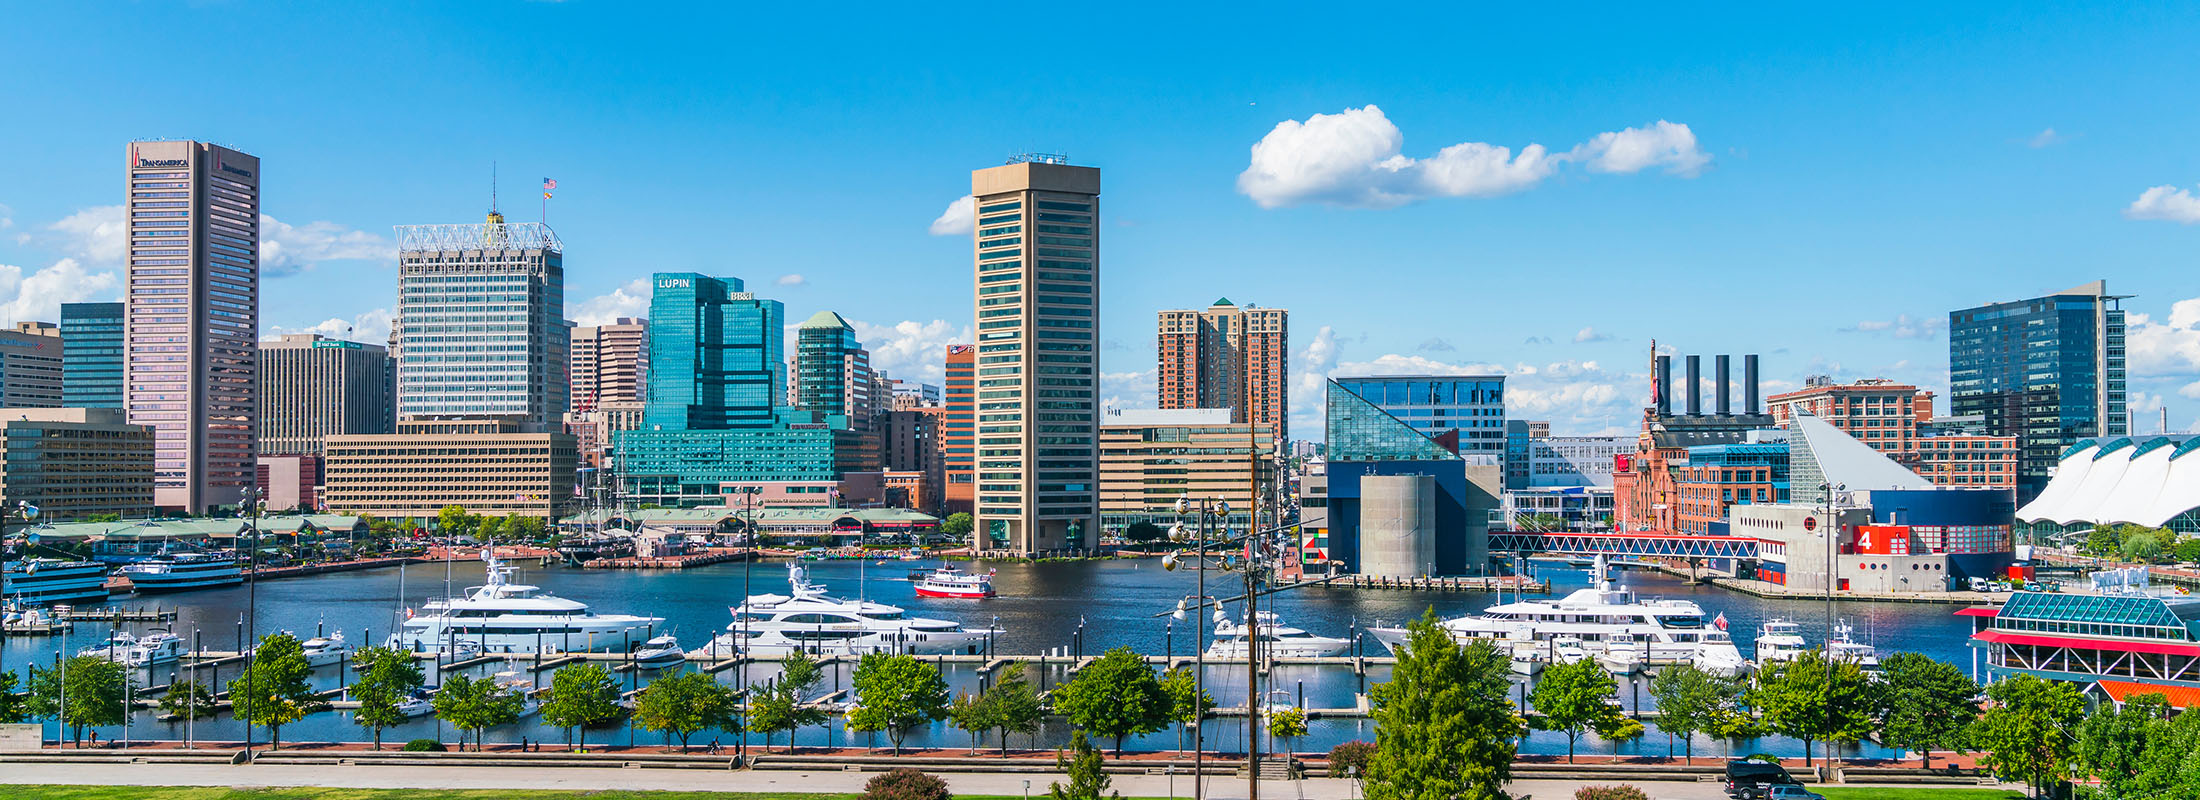 baltimore-skyline-on-a-sunny-day